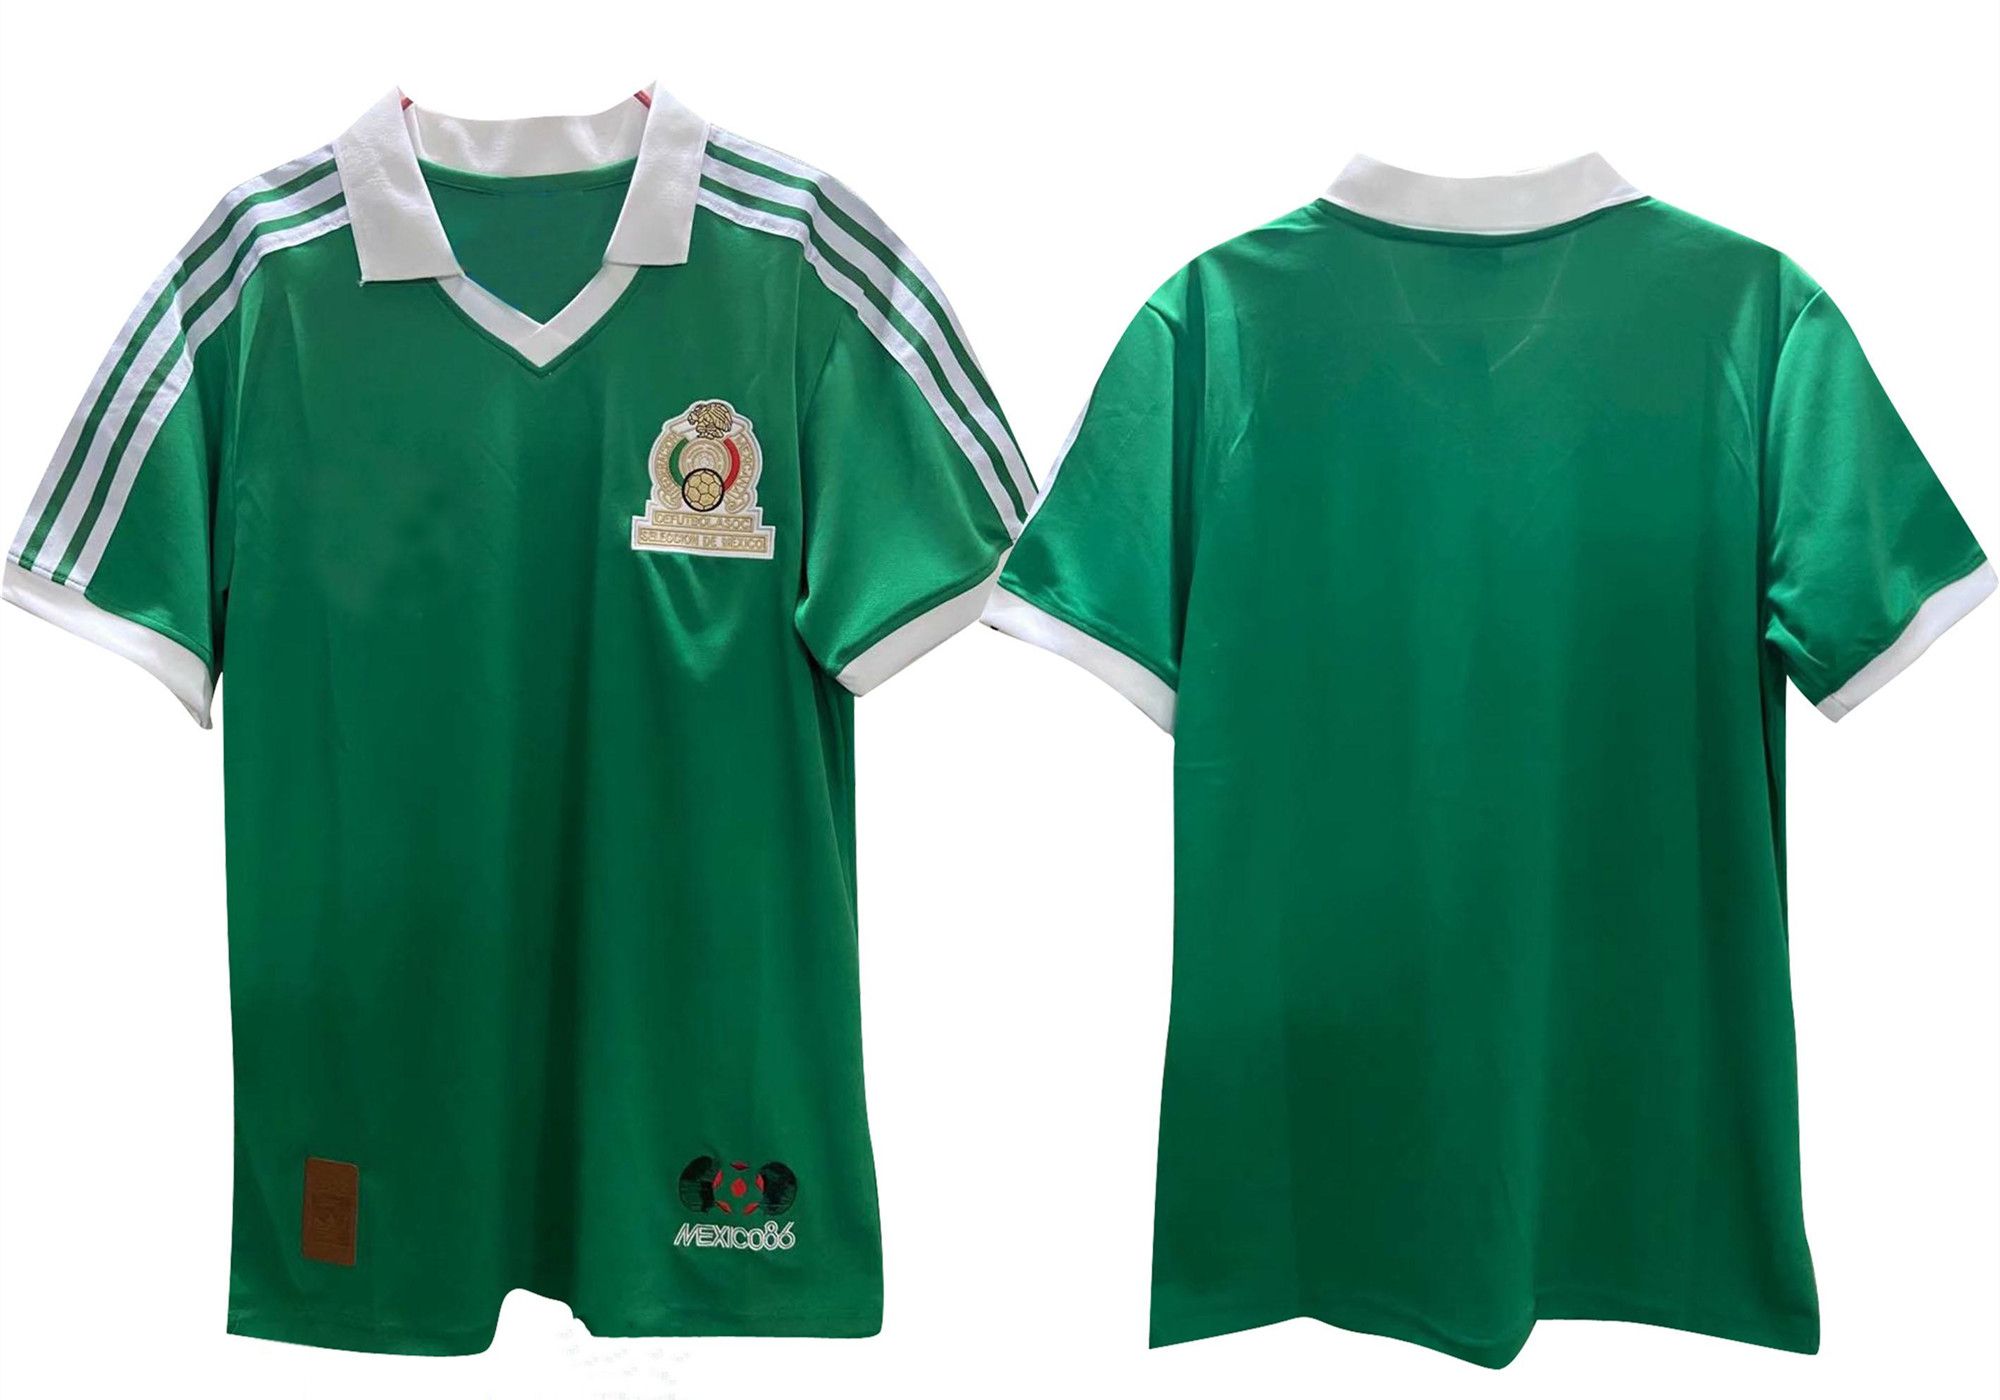 vintage mexico soccer jersey